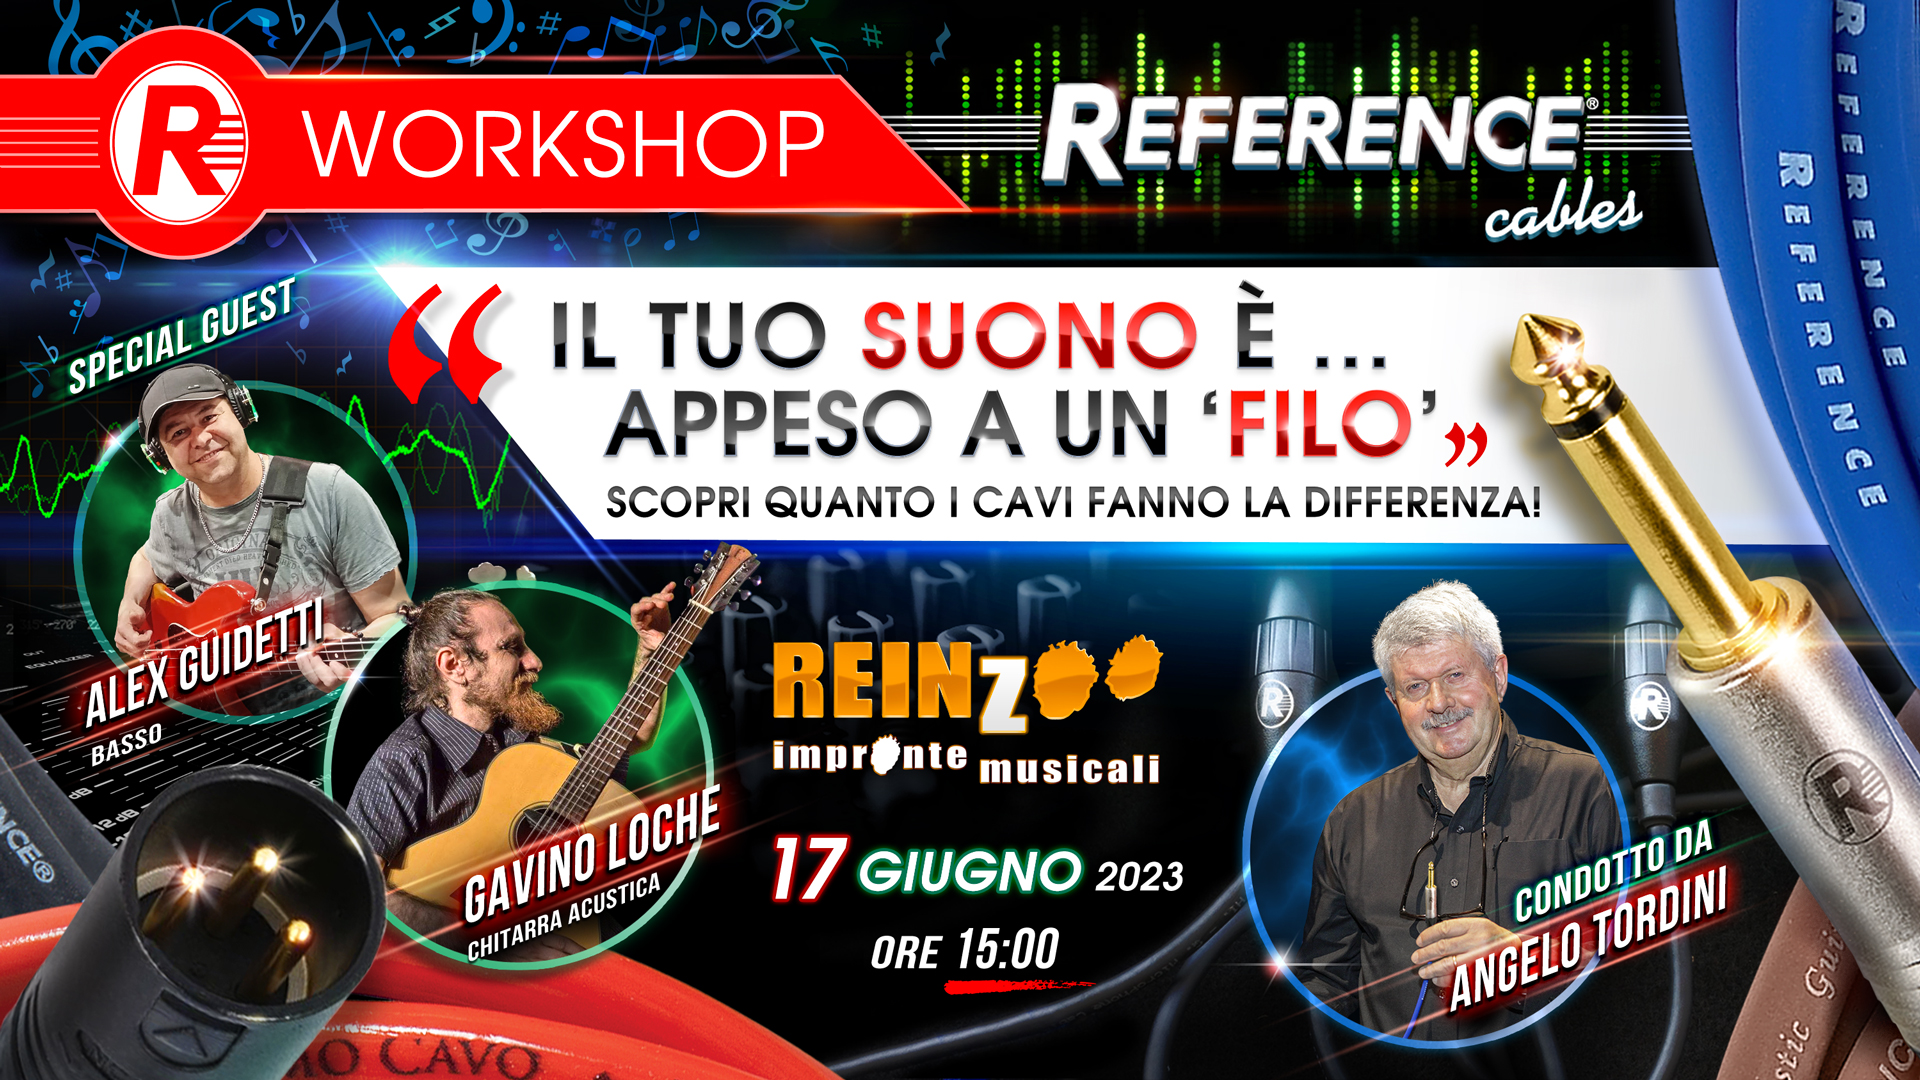 Workshop Reference Cables @ REINZOO impronte musicali